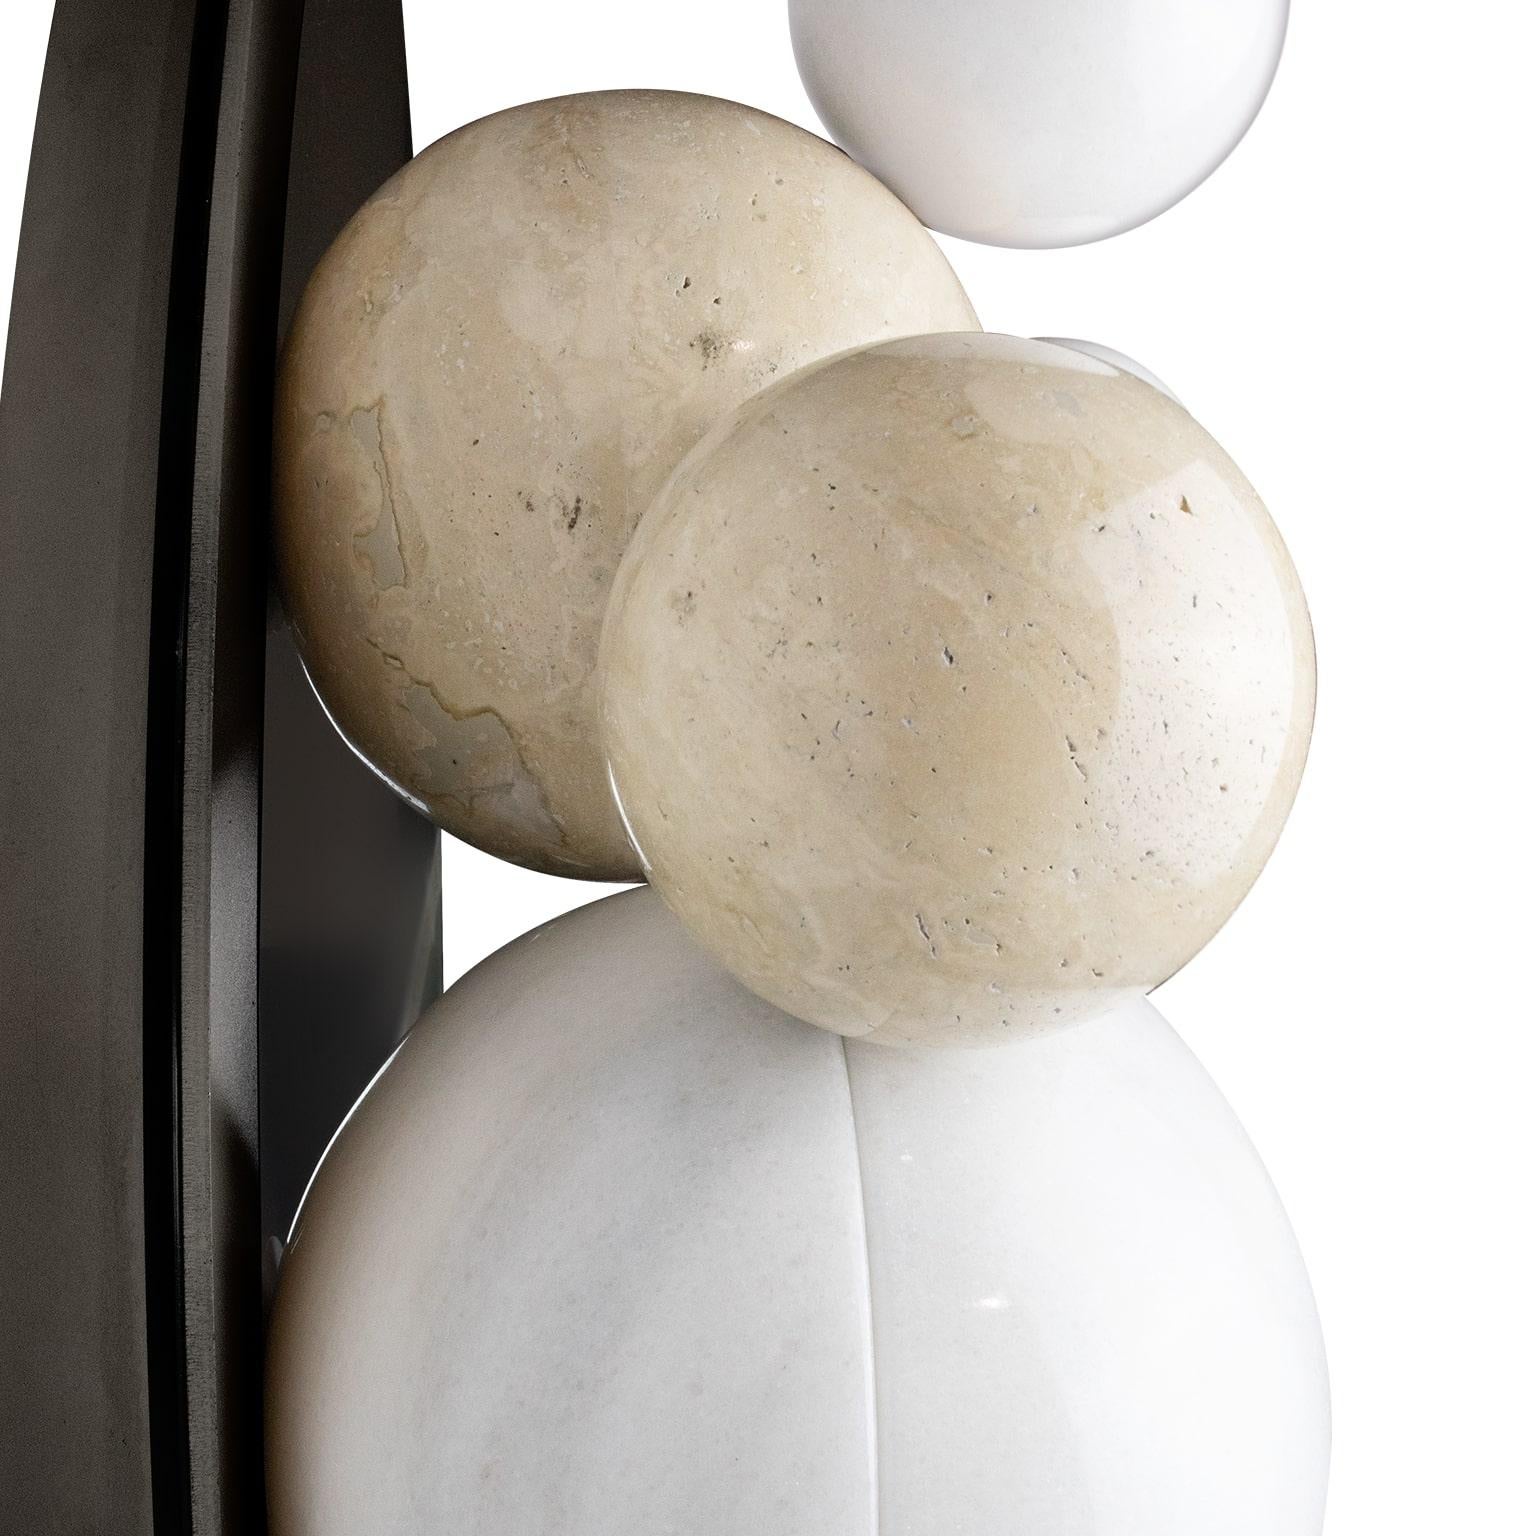 Stainless Steel 21st Century Modern Wall Mirror White Marble Spheres With Incorporated Light For Sale